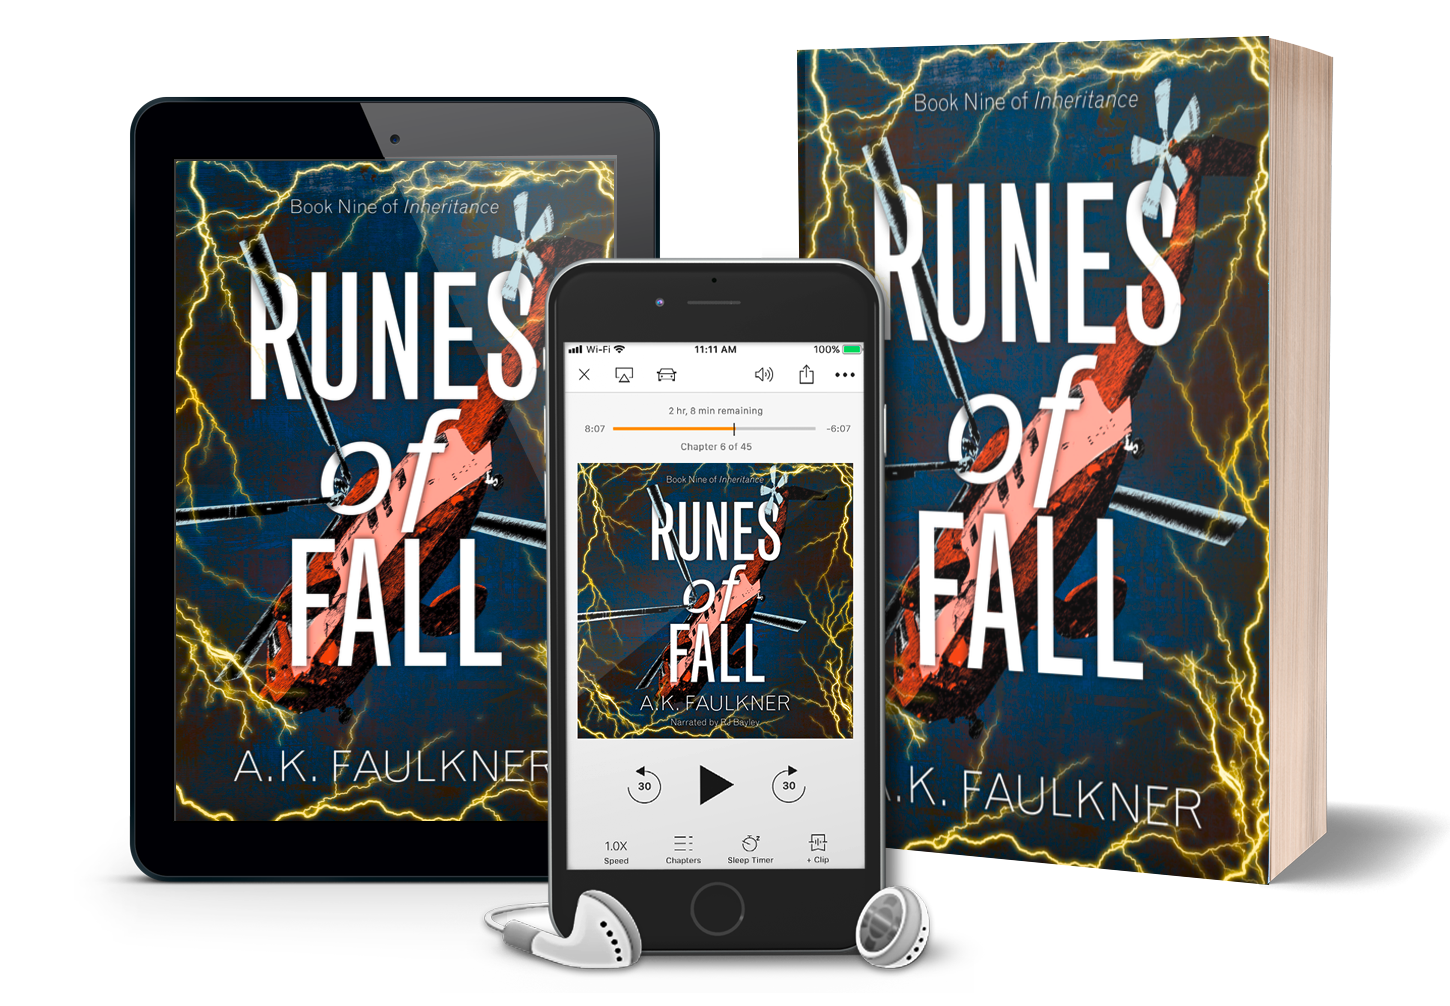 Runes of Fall as an ebook, audiobook, and paperback